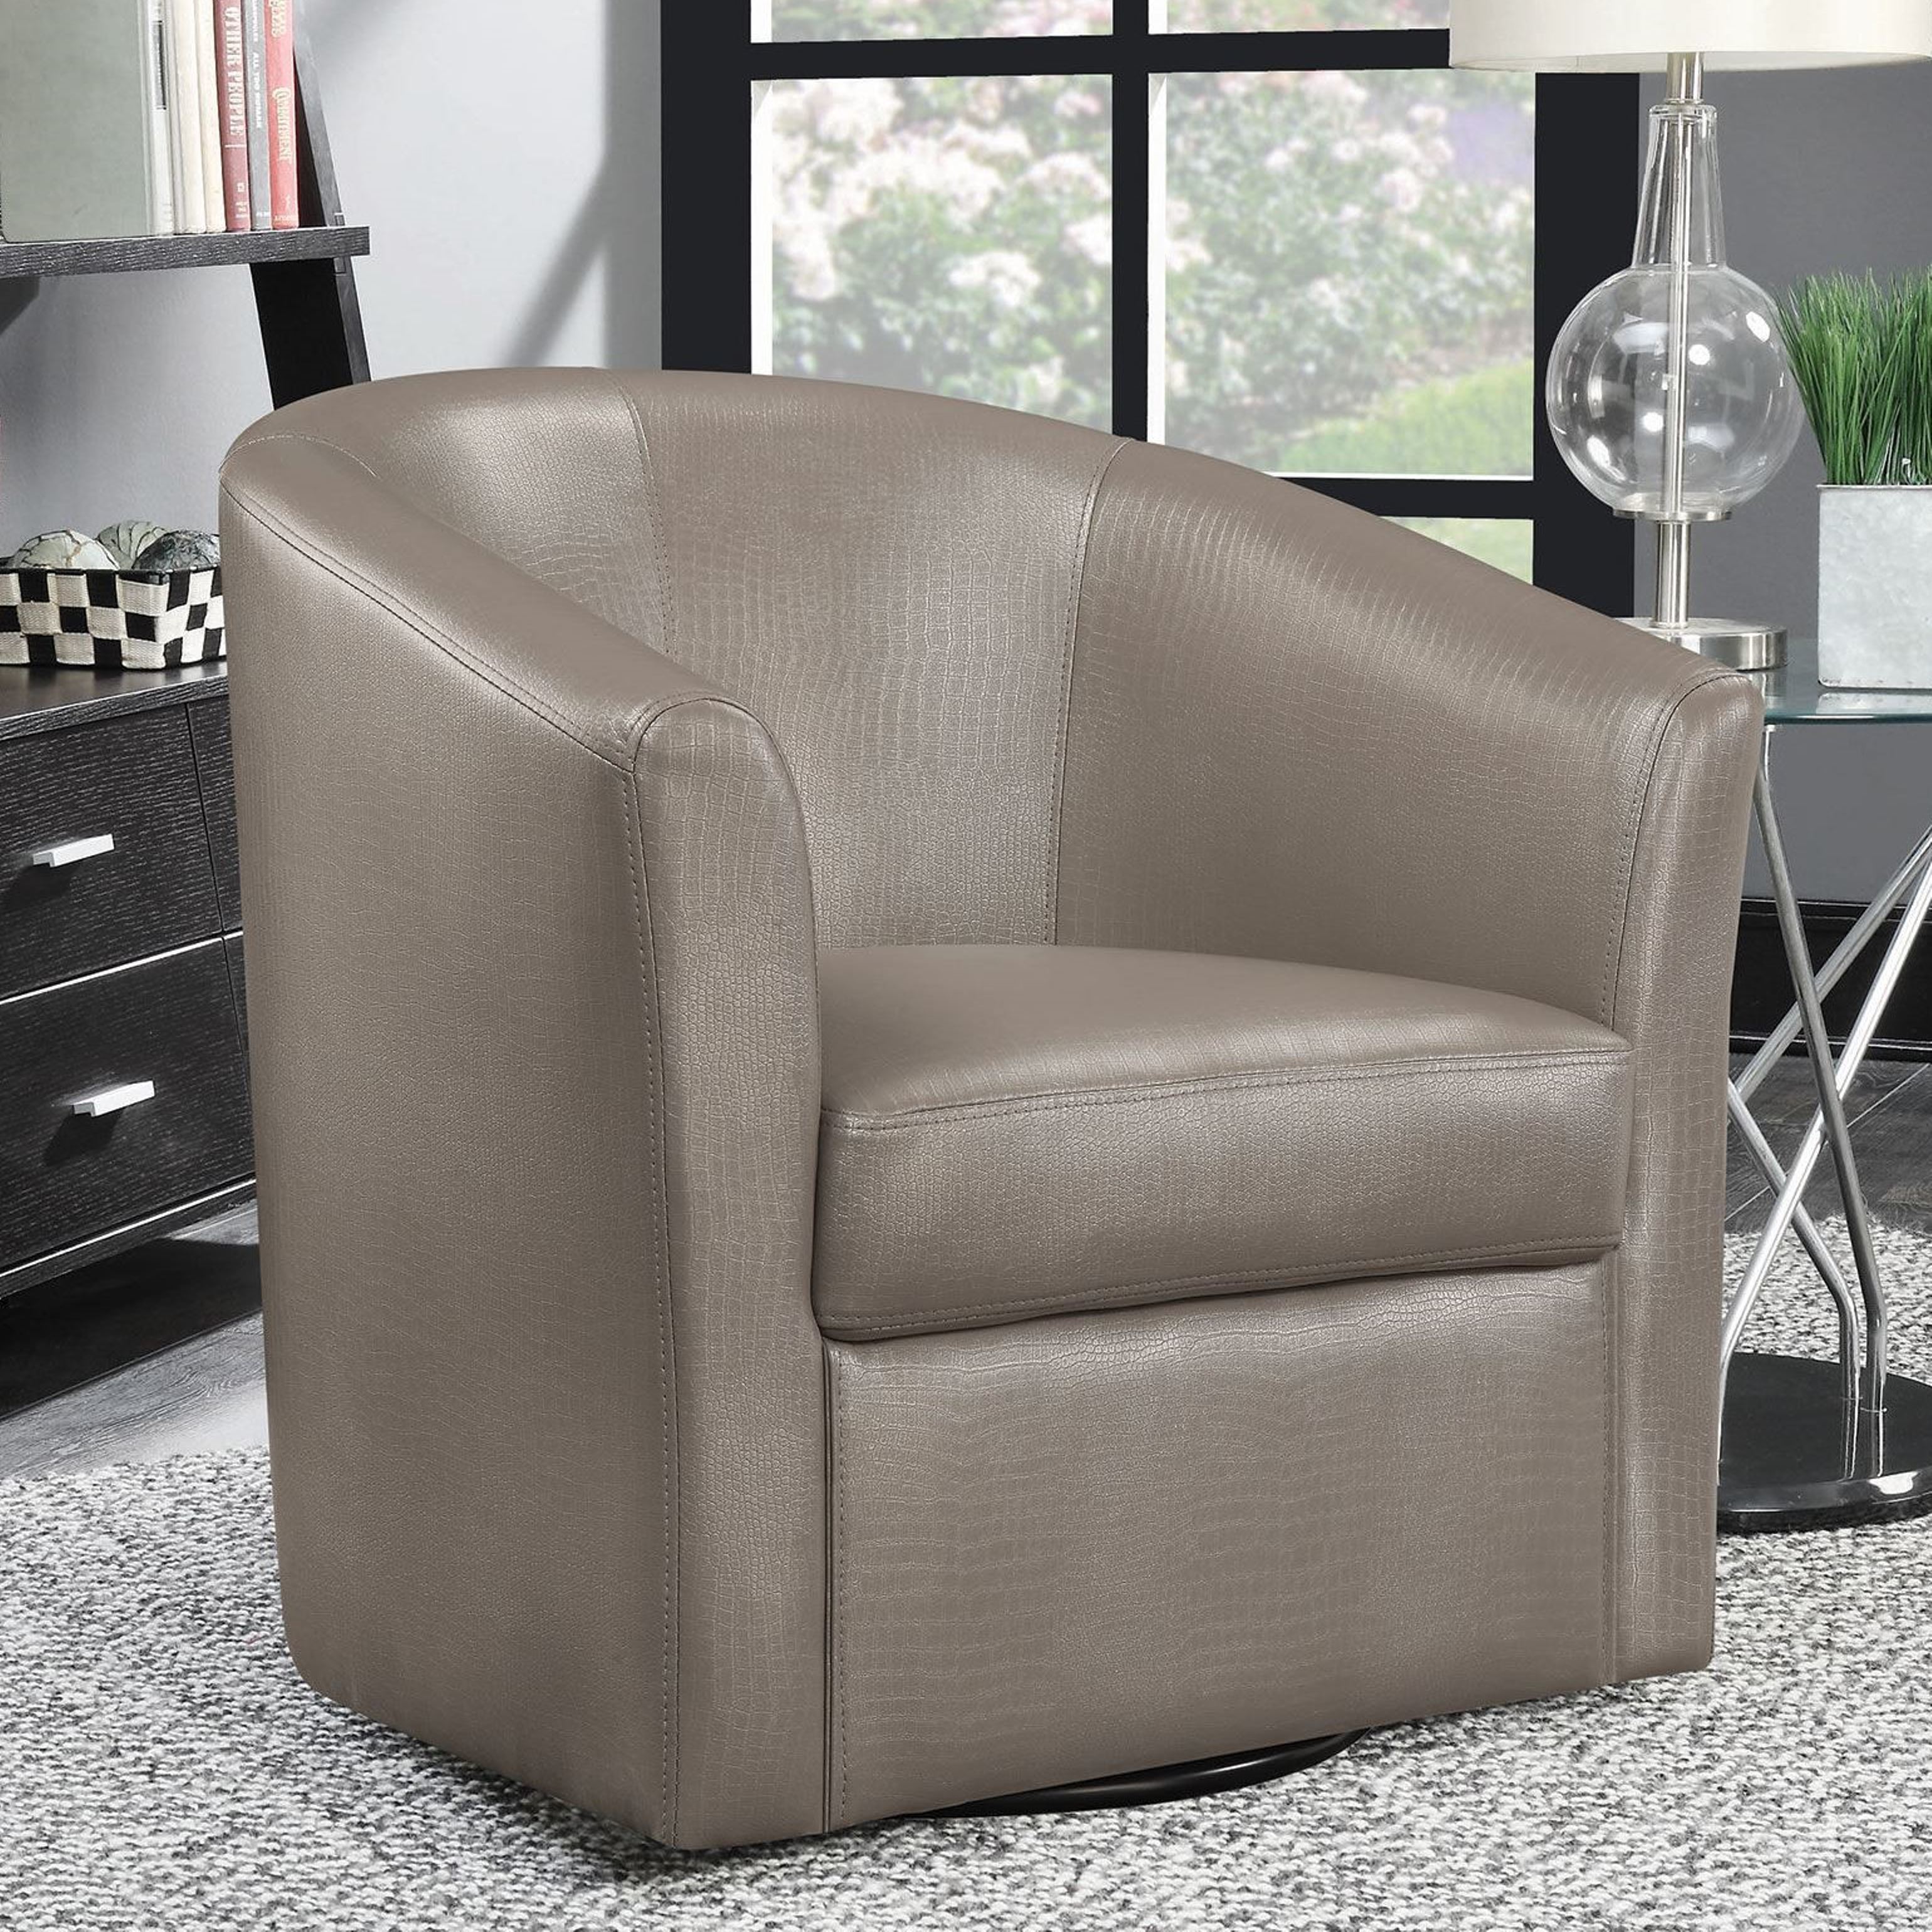 Contemporary Living Room Swivel Barrel Style Accent Chair Overstock 16287362